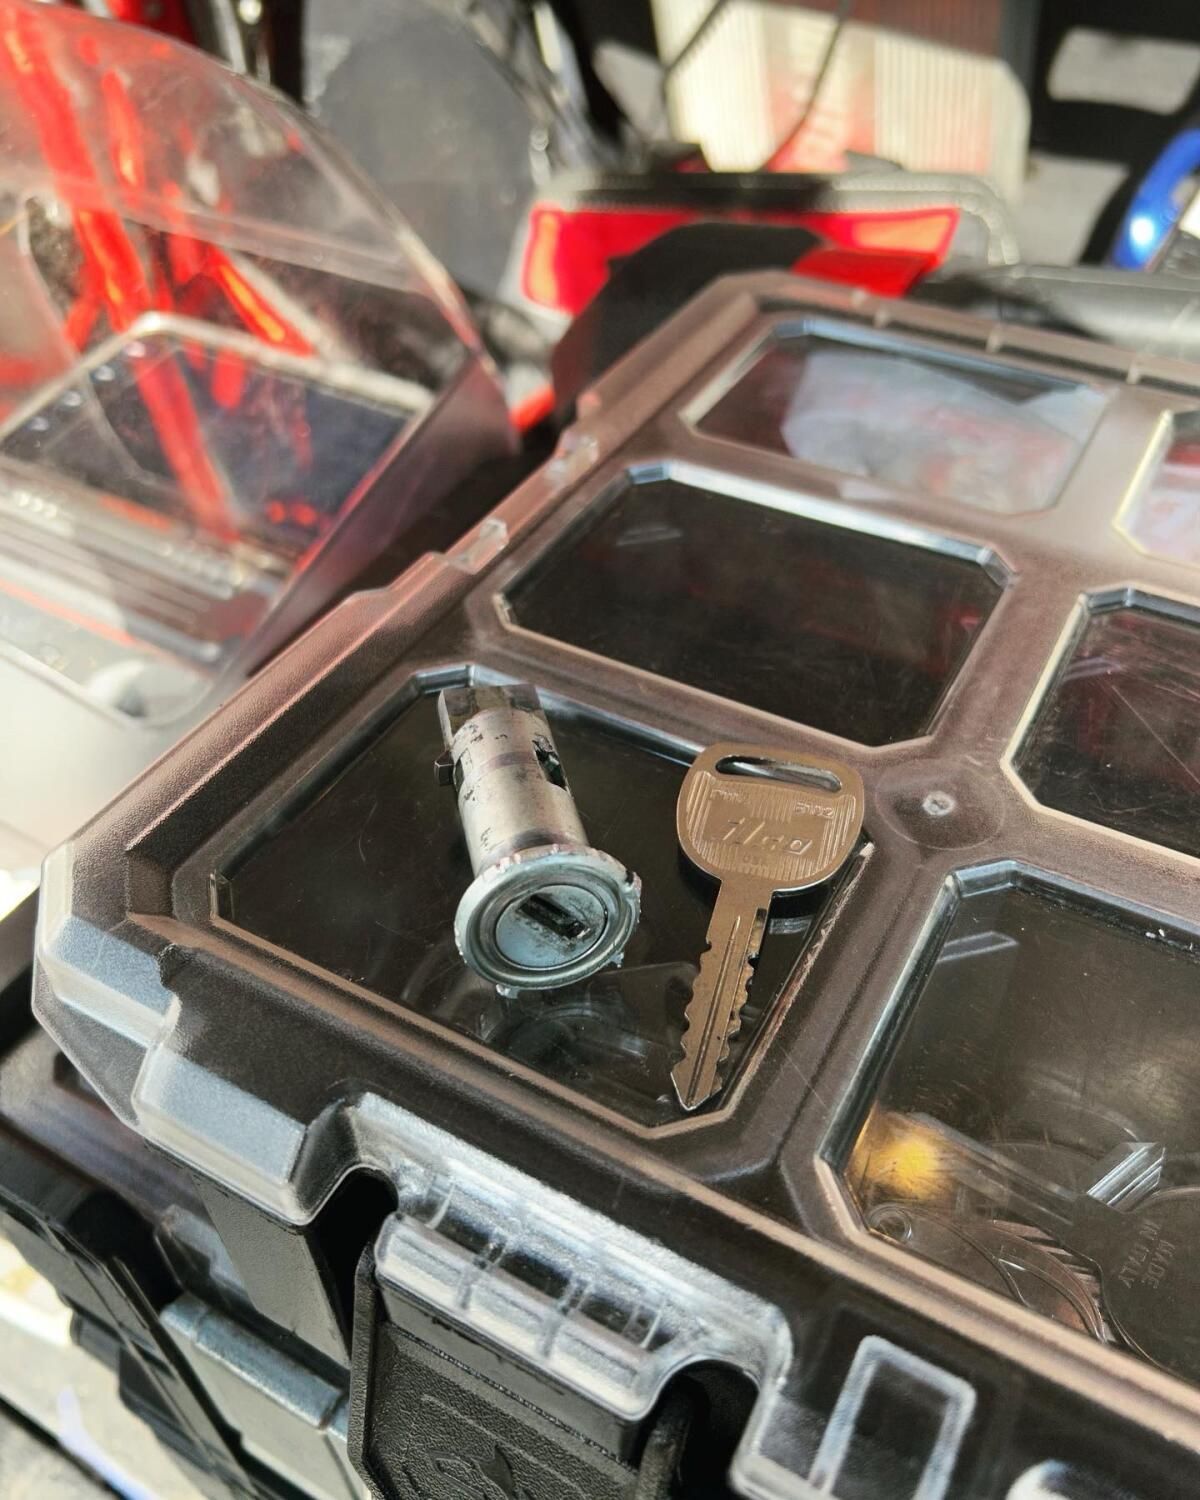 A key is sitting on top of a plastic container.